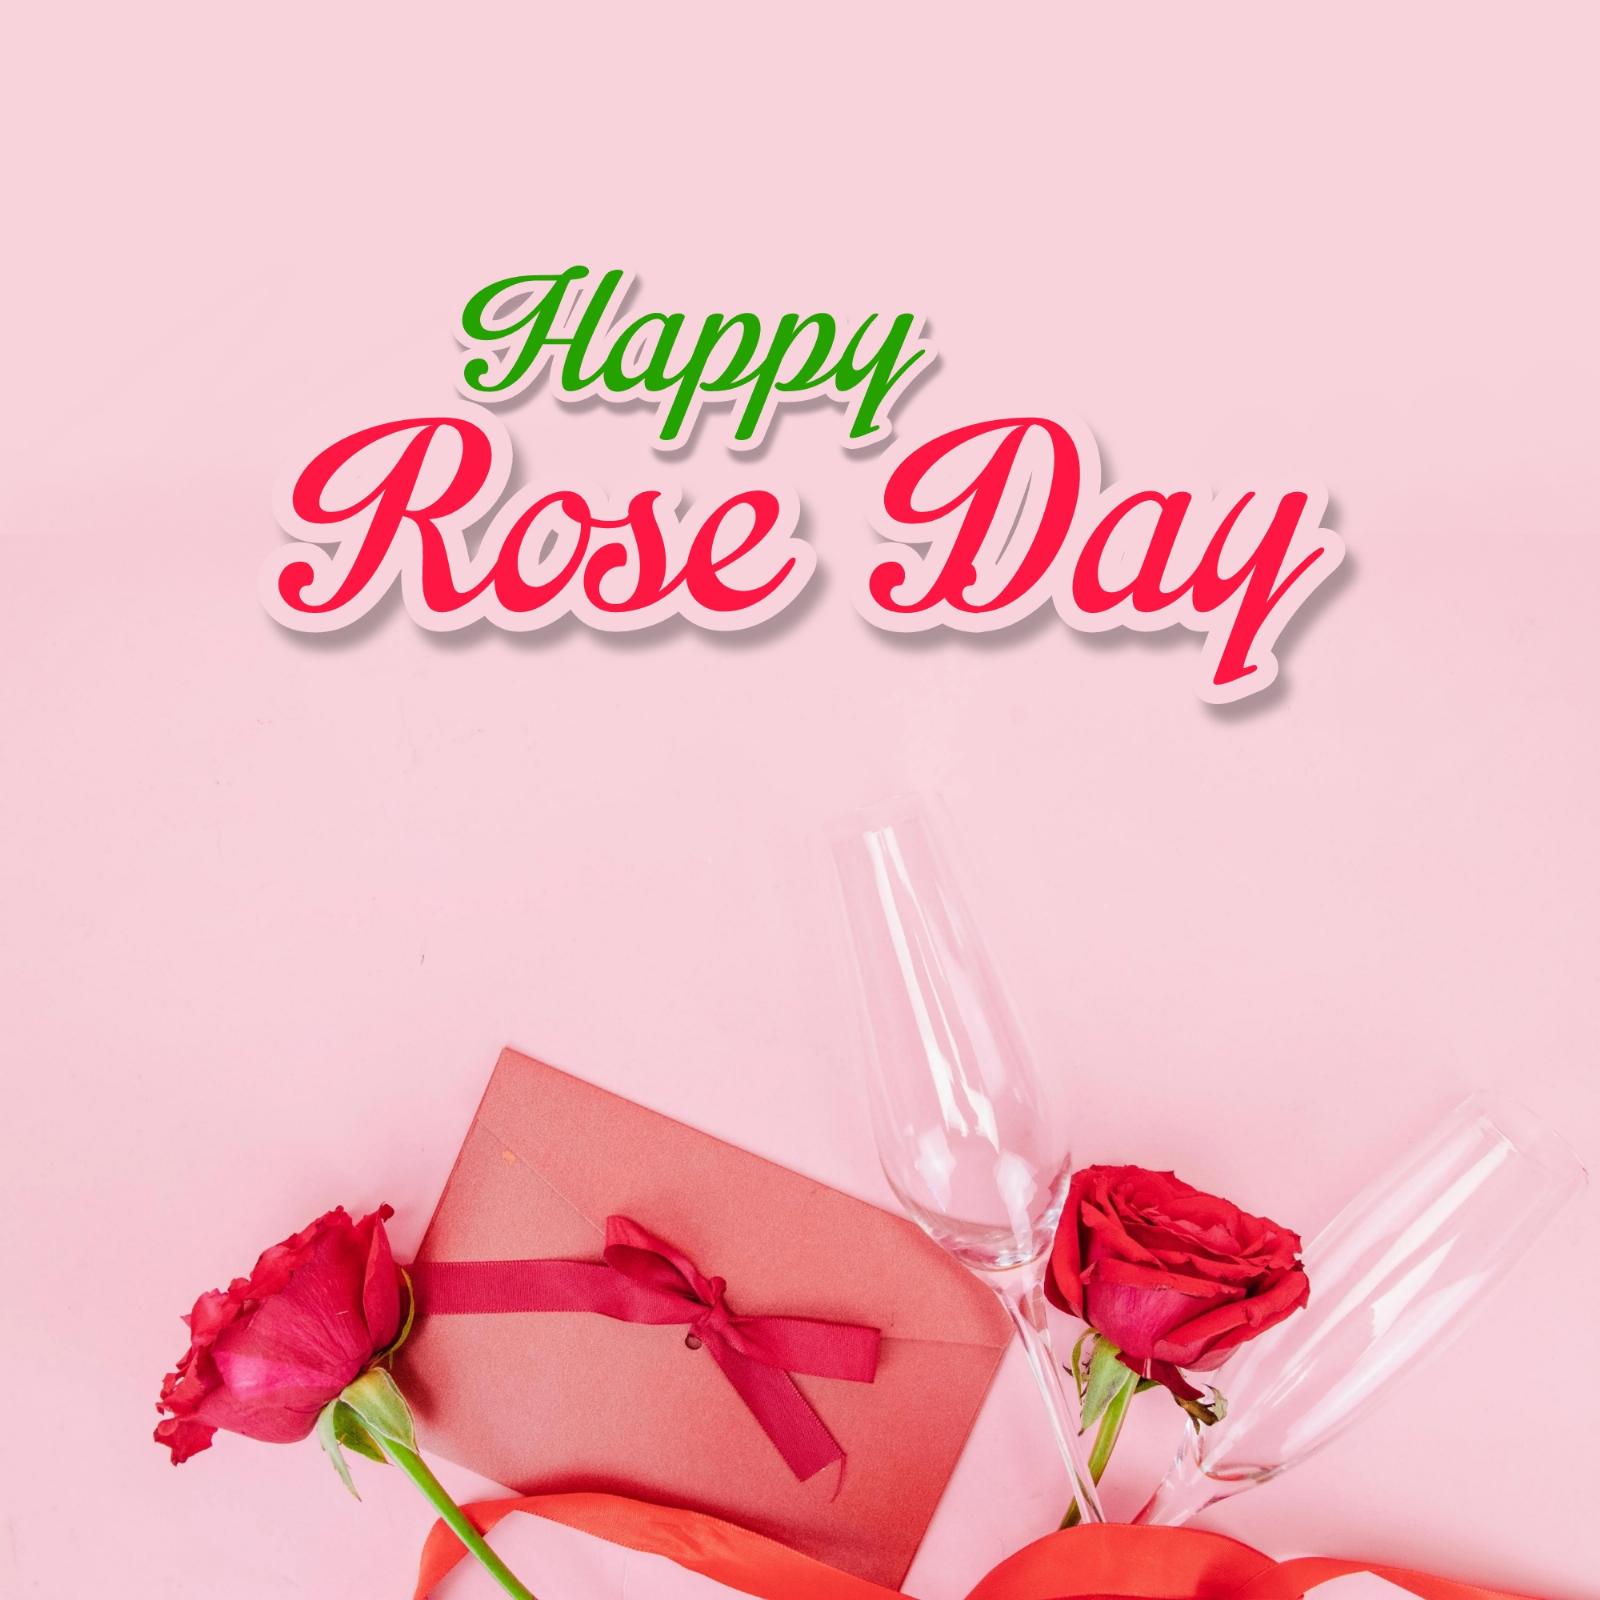 Happy Rose Day Images For Boyfriend